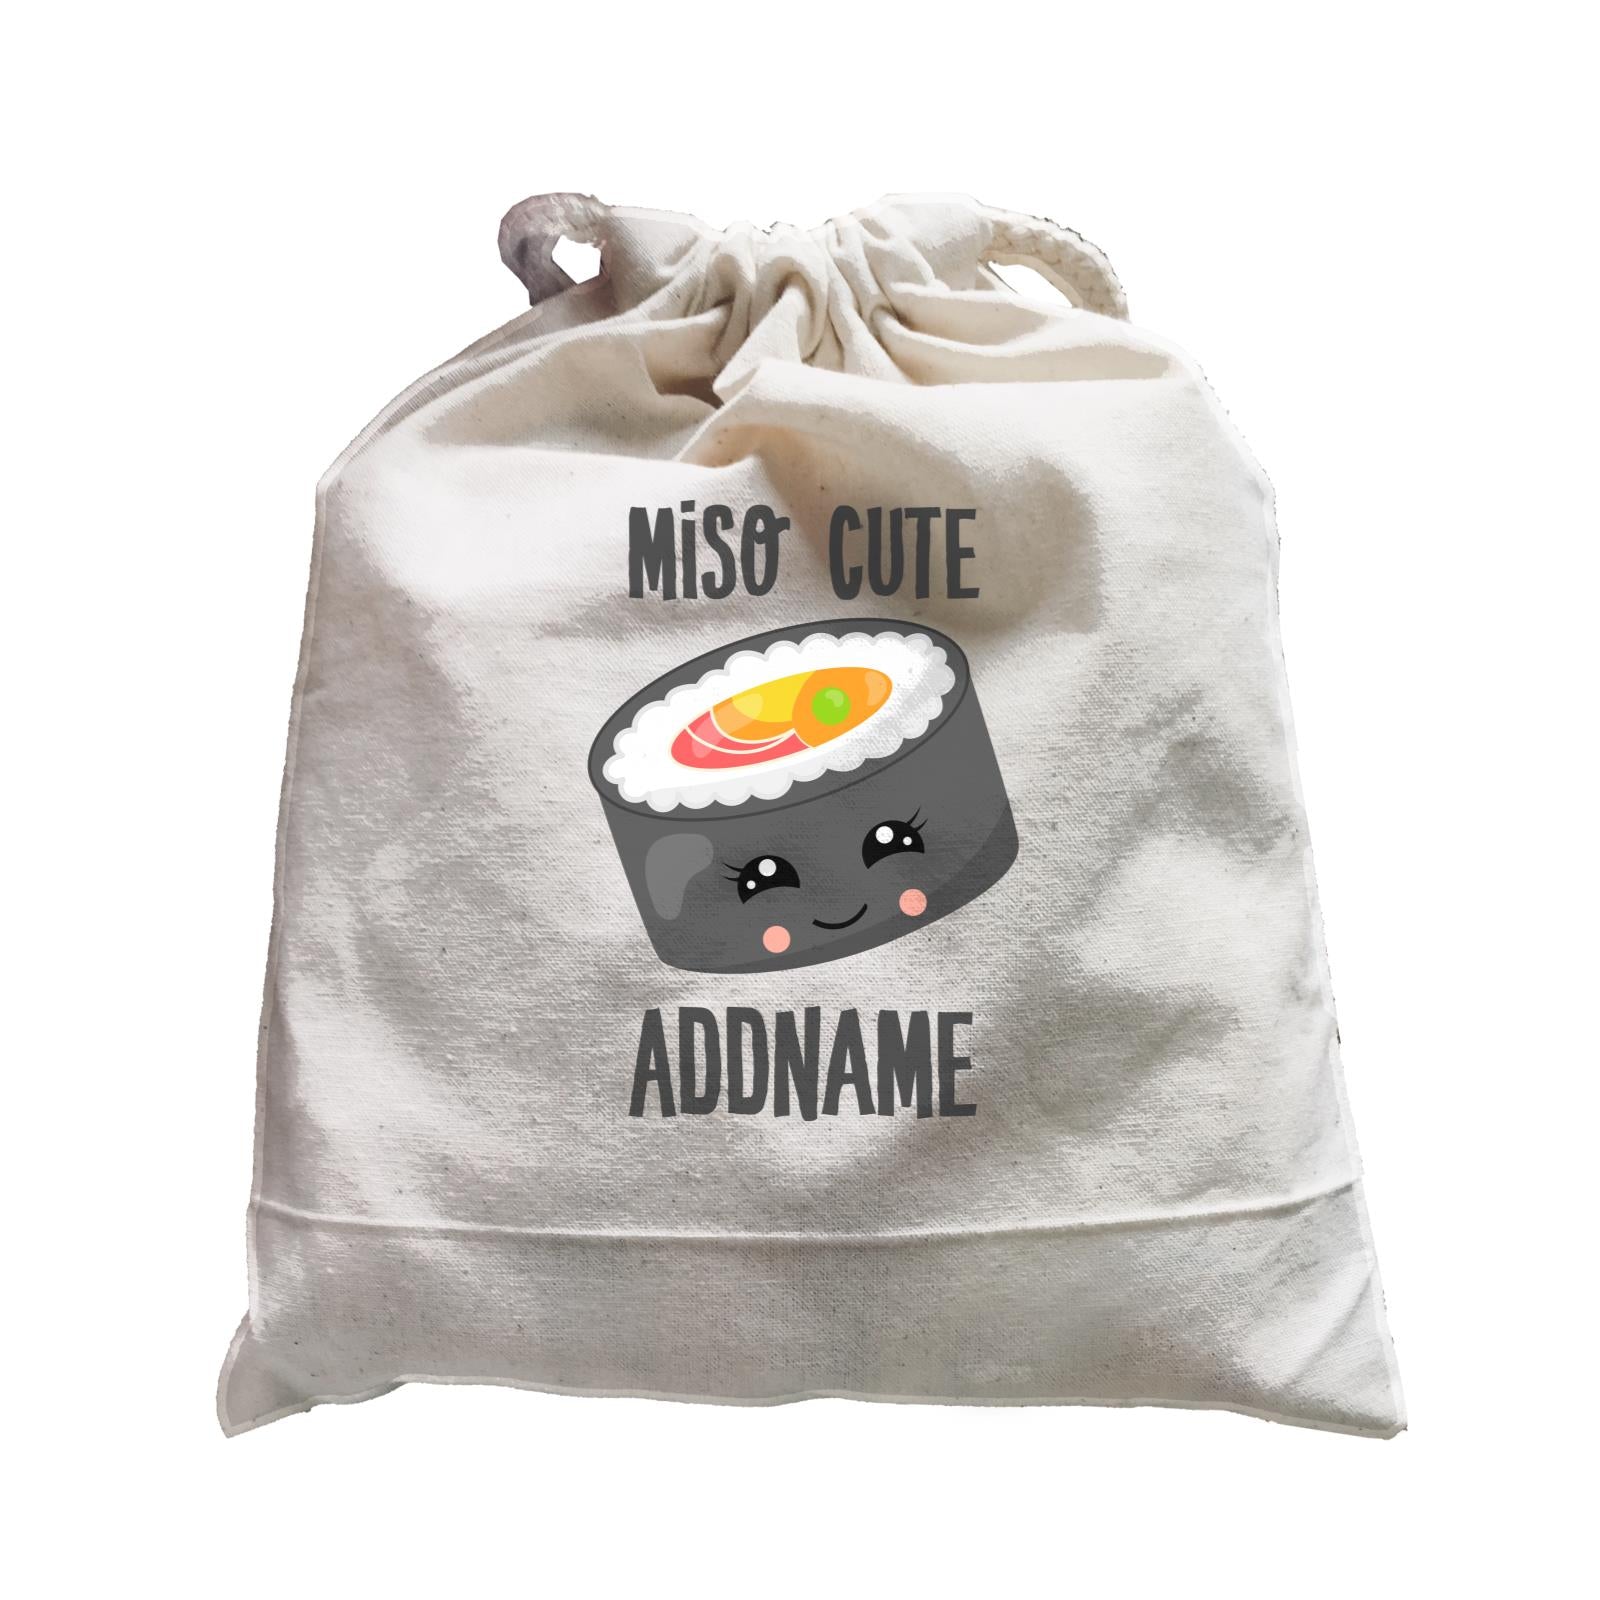 Miso Cute Sushi Circle Roll Addname Satchel